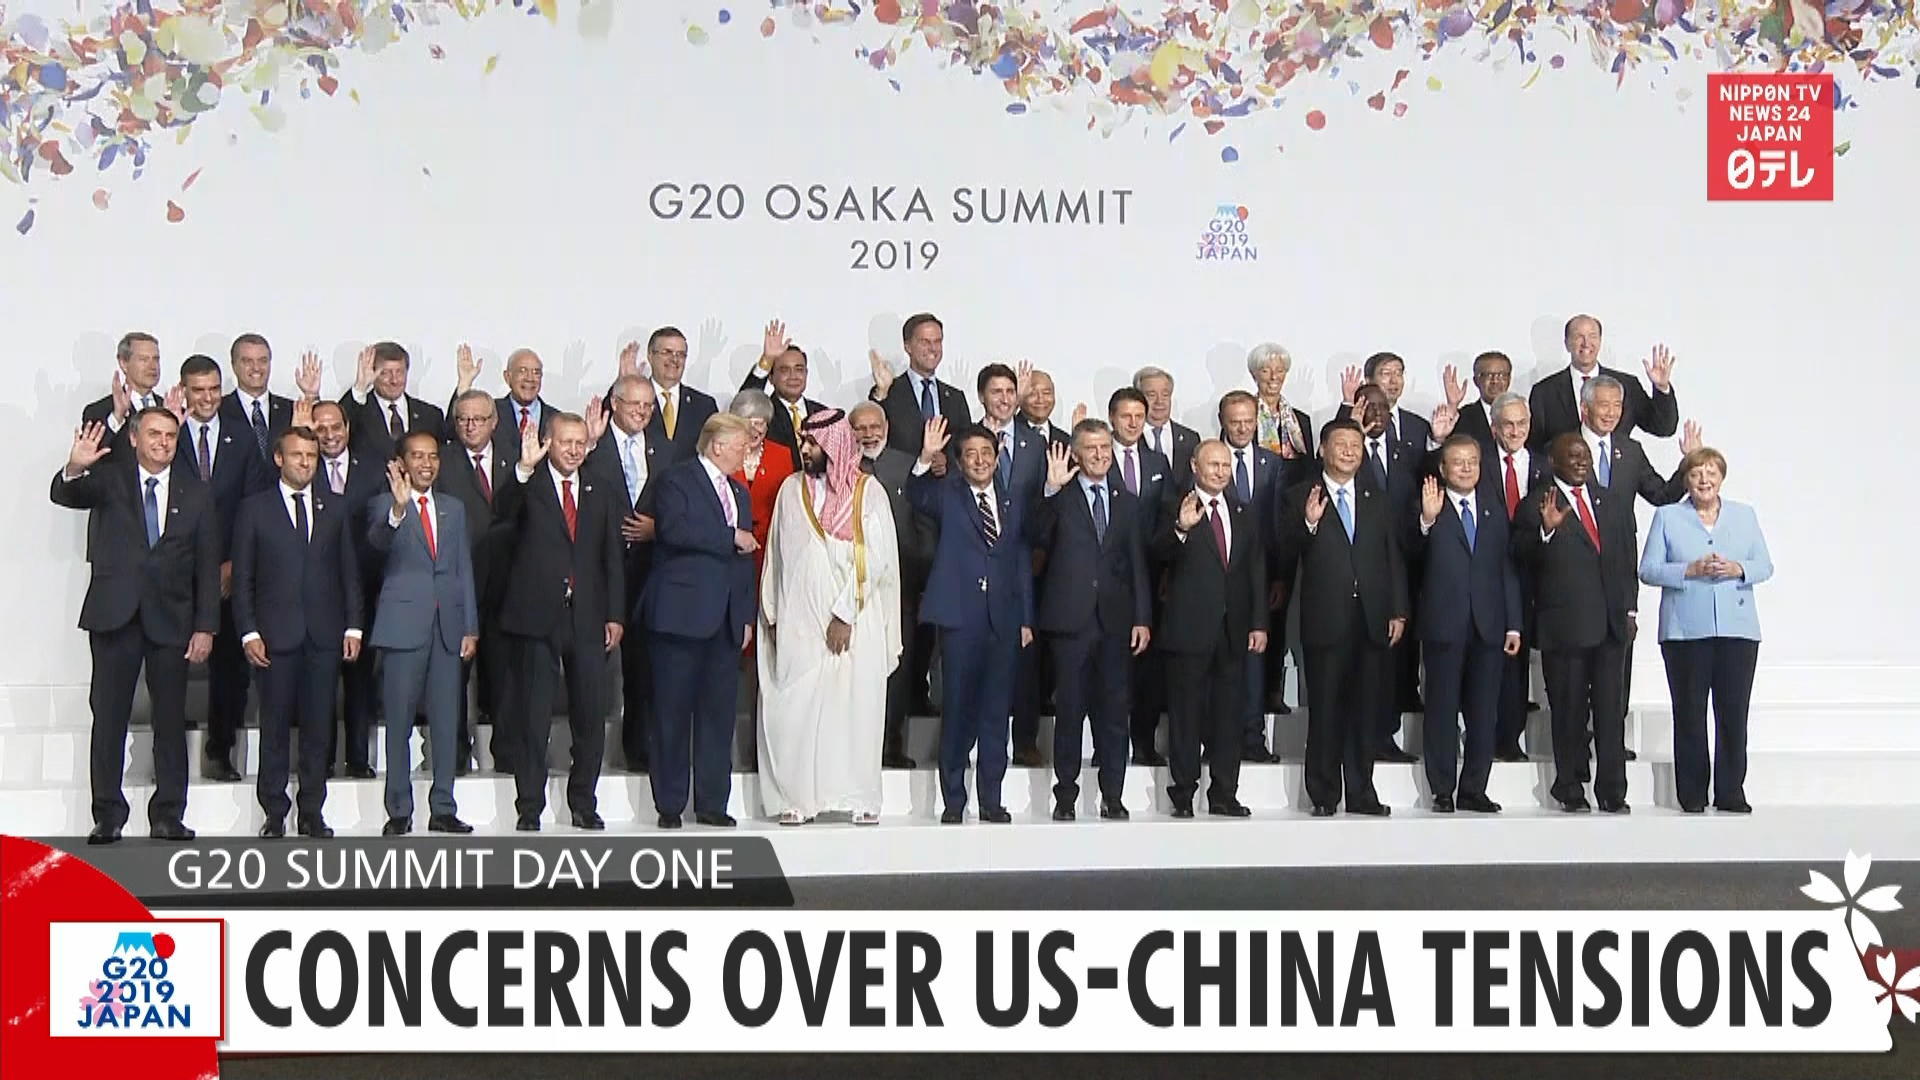 G20: Concerns over US-China tensions